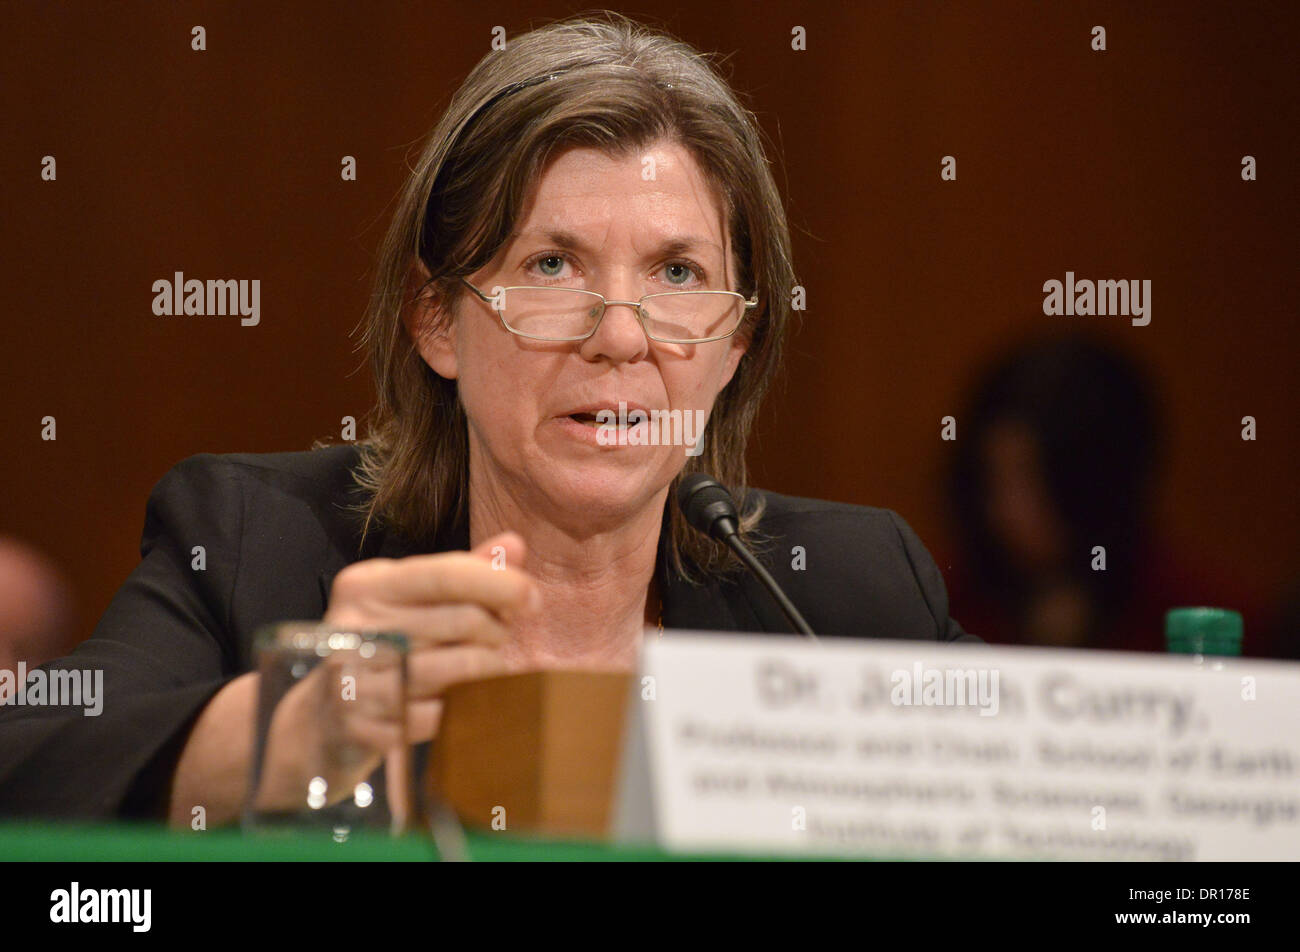 Washington, DC, USA. 16th Jan, 2014. JUDITH CURRY, a climatologist and chair of the School of Earth and Atmospheric Sciences at the Georgia Institute of Technology, answers questions from a skeptical Democratic senator during a contentious Senate Environment and Public Works Committee hearing on climate change. A group of Senate Democrats, including committee chair Sen. Barbara Boxer, D-CA, has launched a new campaign to focus attention on the subject. Credit:  Jay Mallin/ZUMAPRESS.com/Alamy Live News Stock Photo